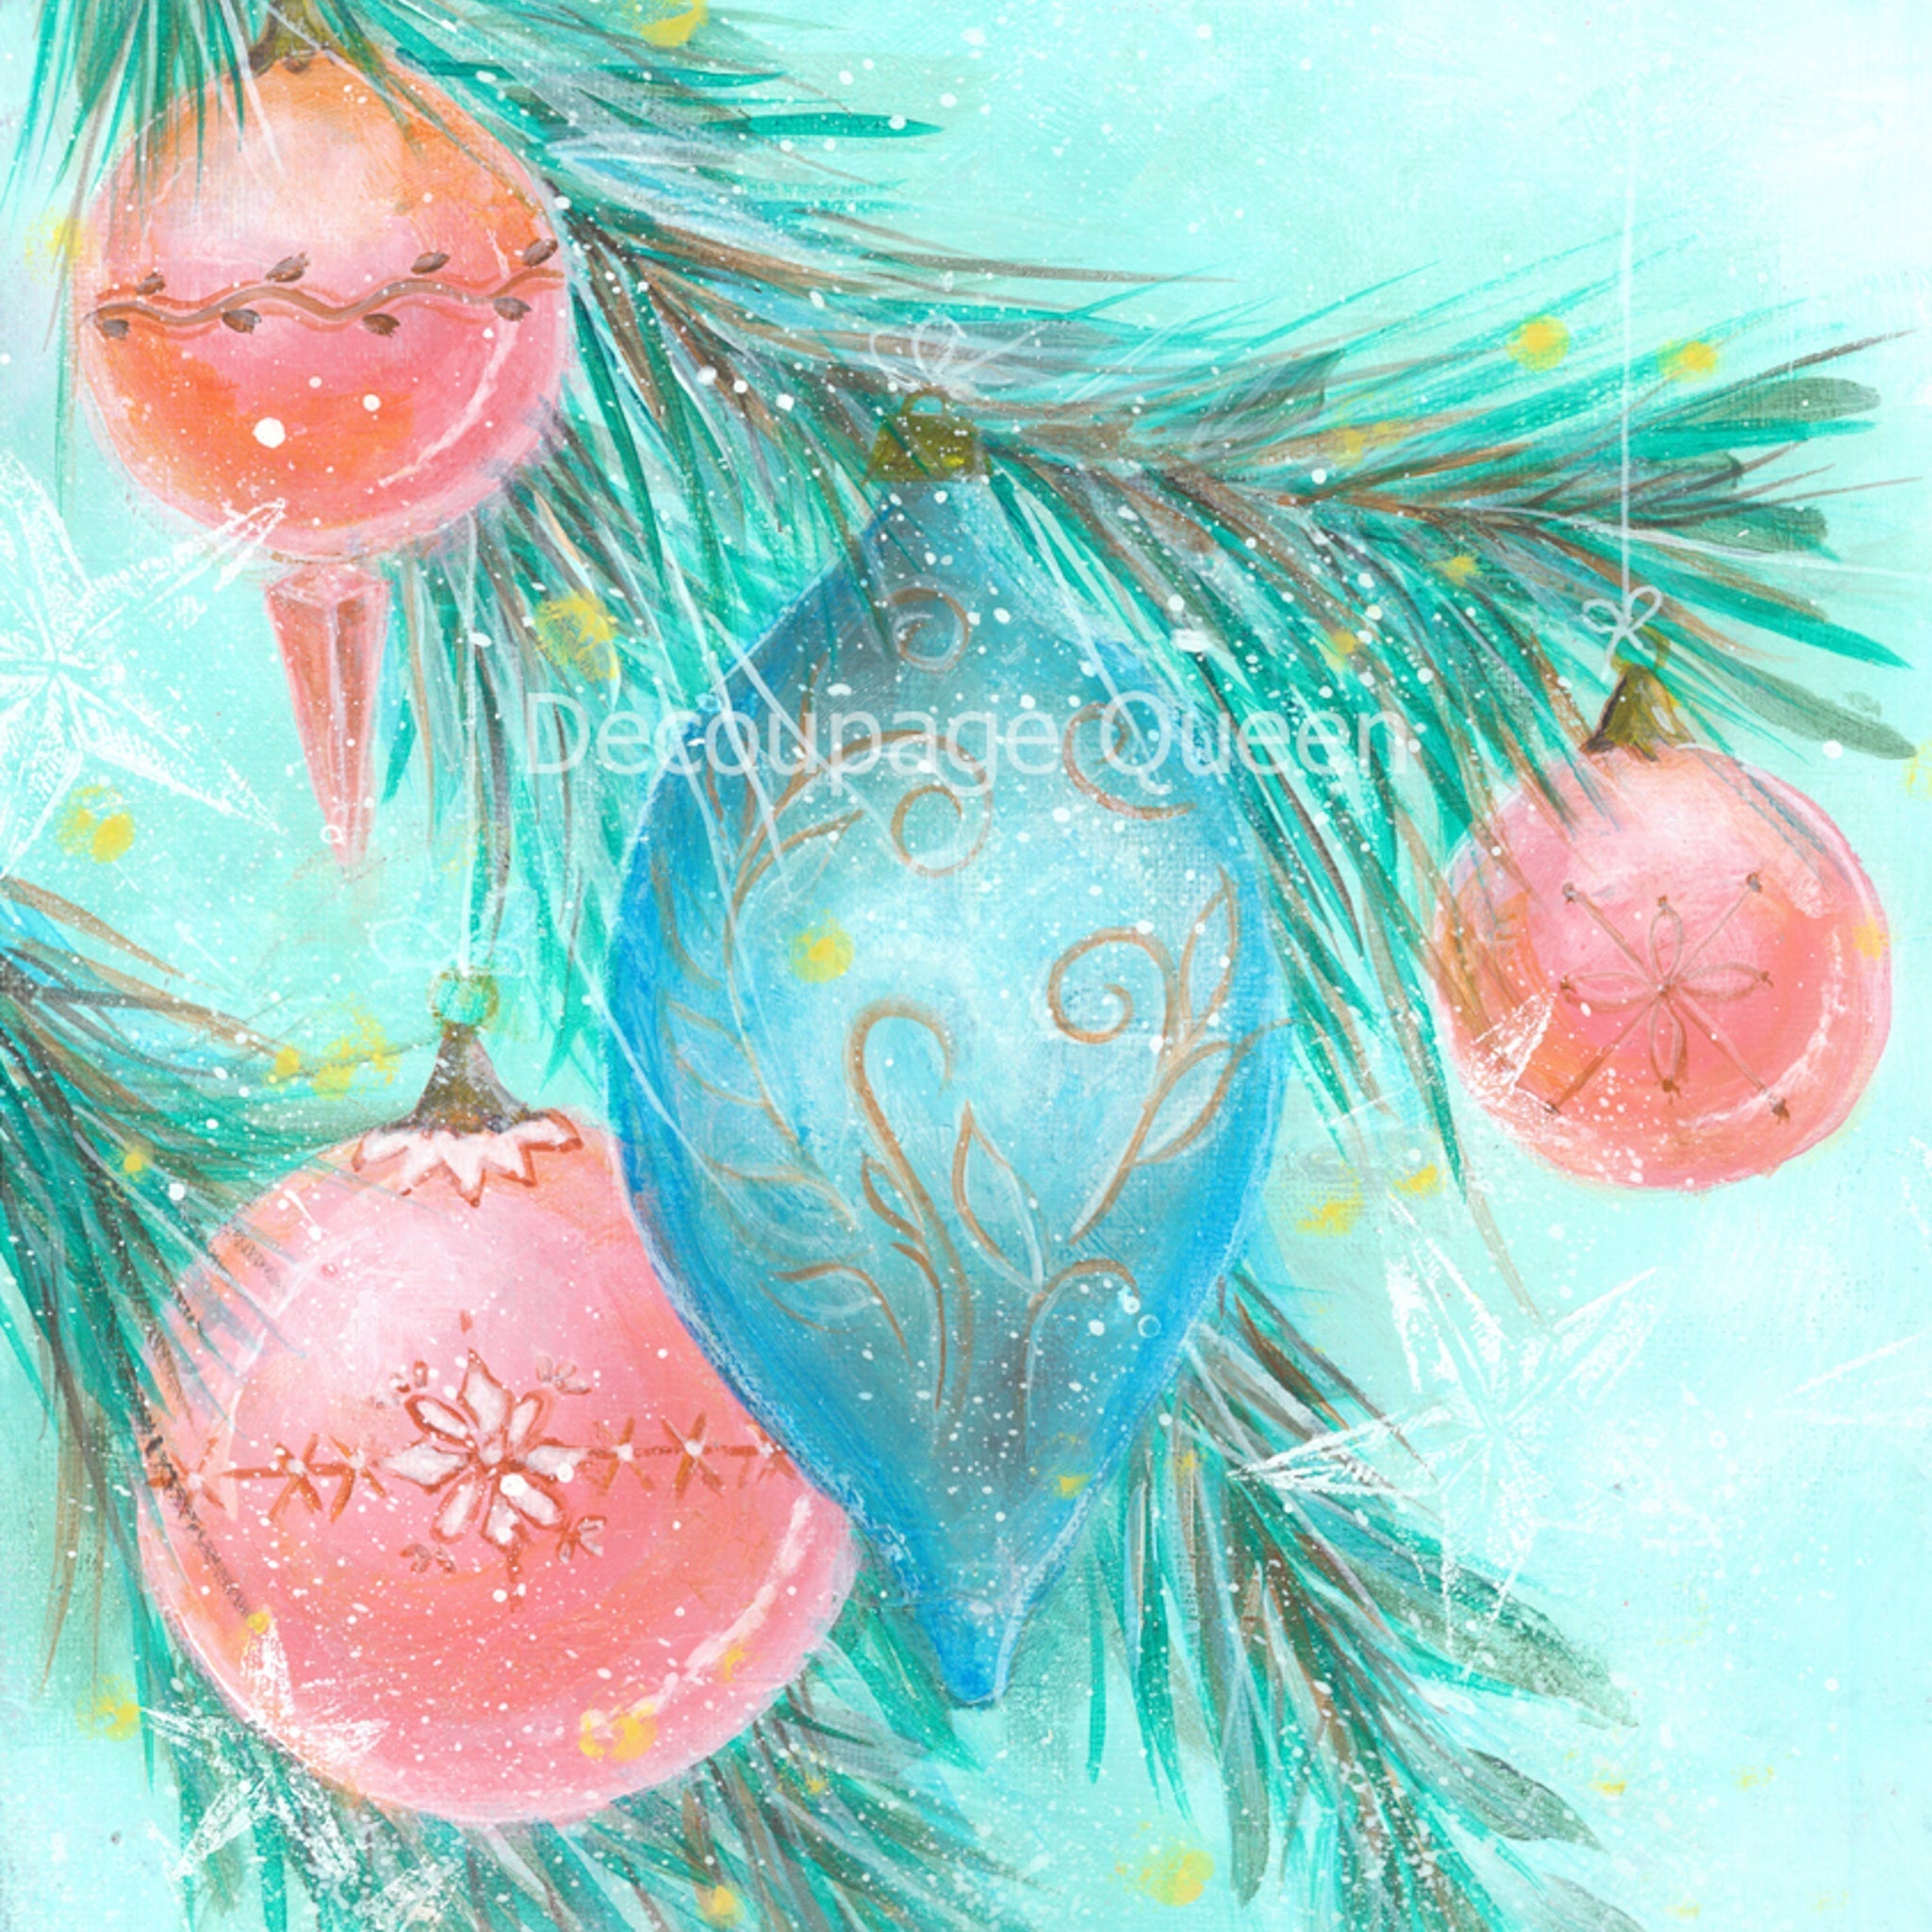 Hand painted style A1 rice paper design of pink and blue ornaments on a pine tree on a soft teal background.